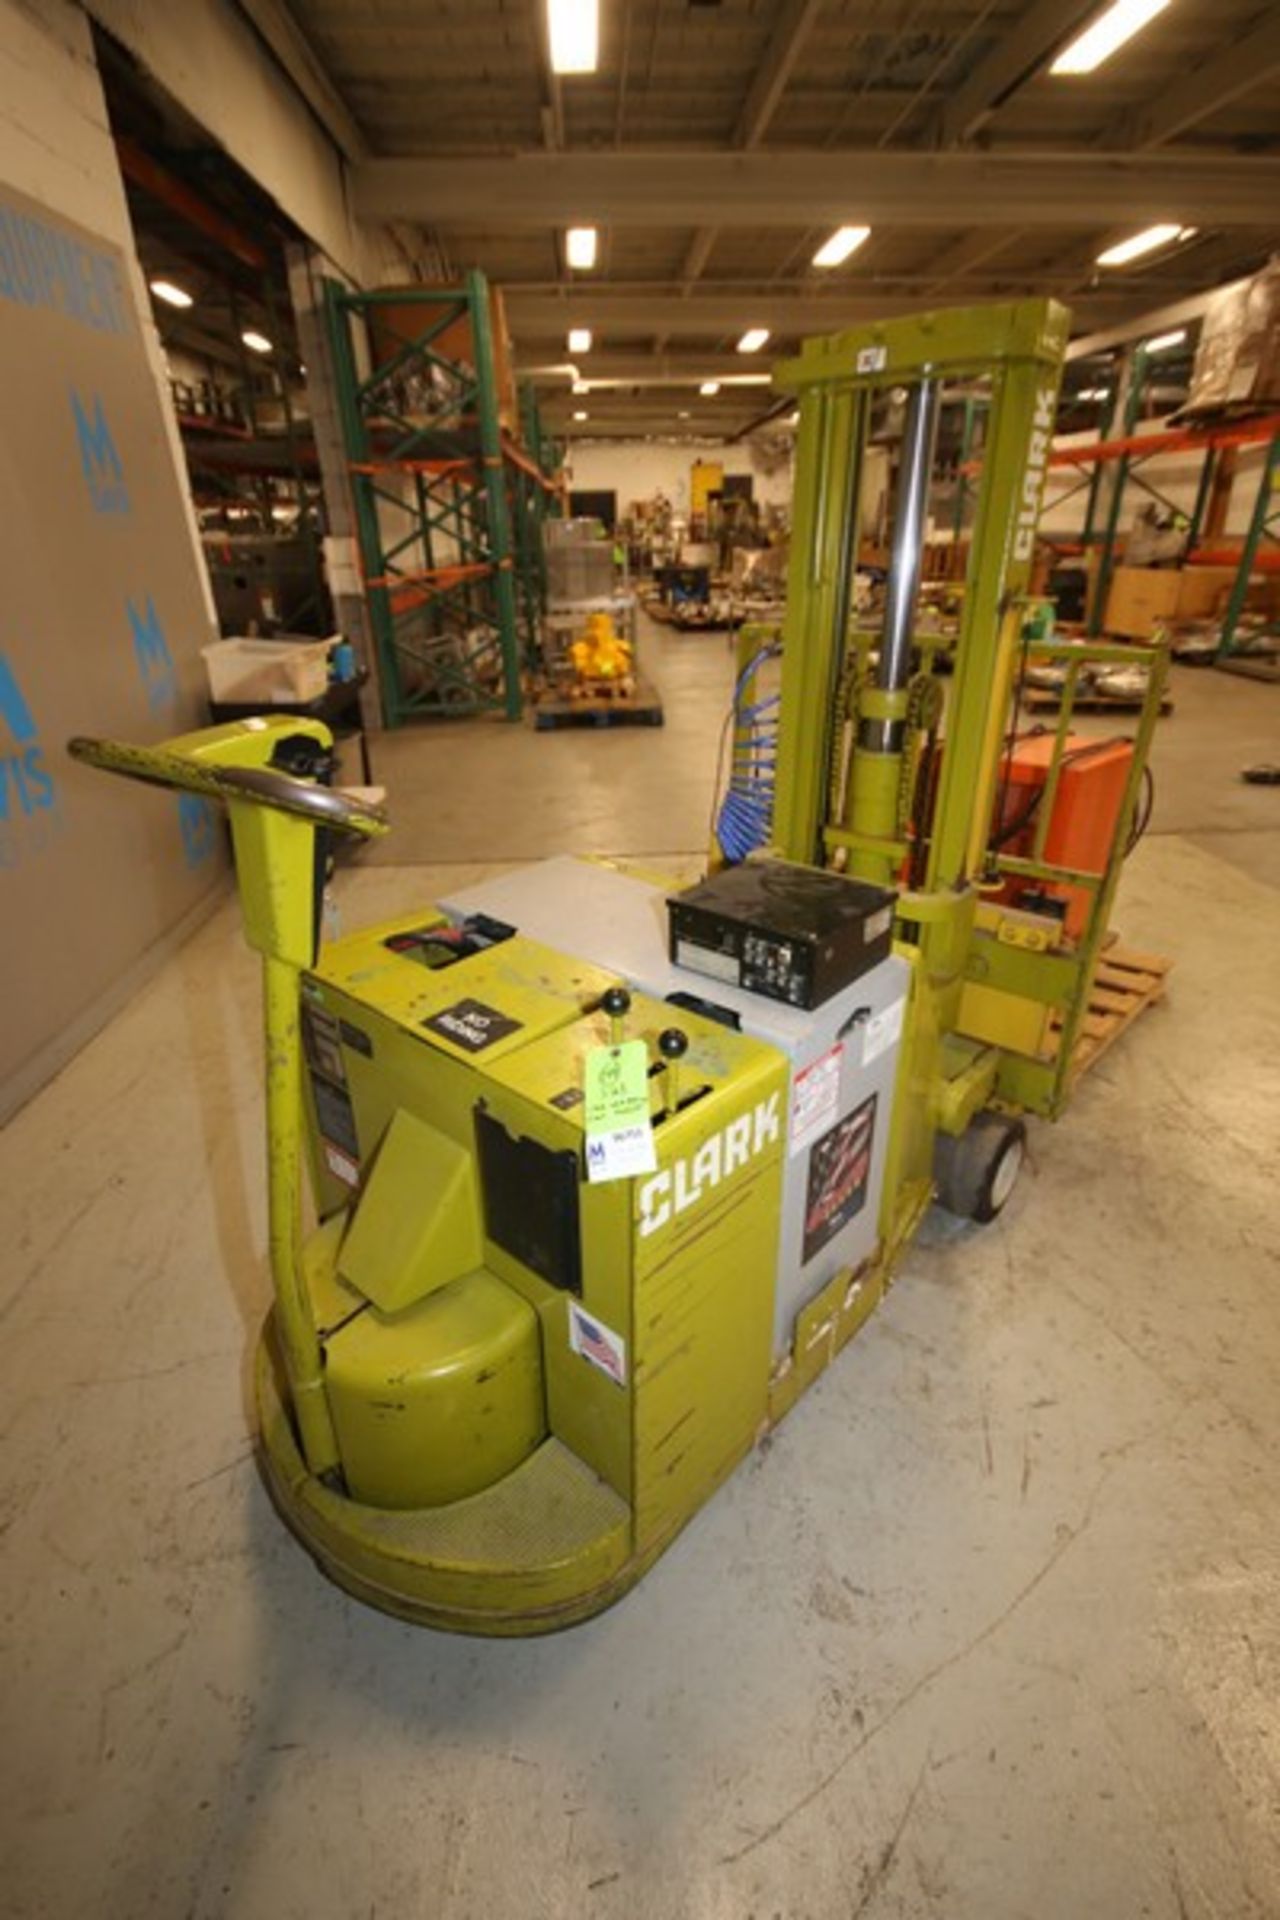 Clark 2,500 lbs. Capacity Walk Behind 24V Electric Forklift, Model St25B, SN ST24501894710FA, with - Image 2 of 8